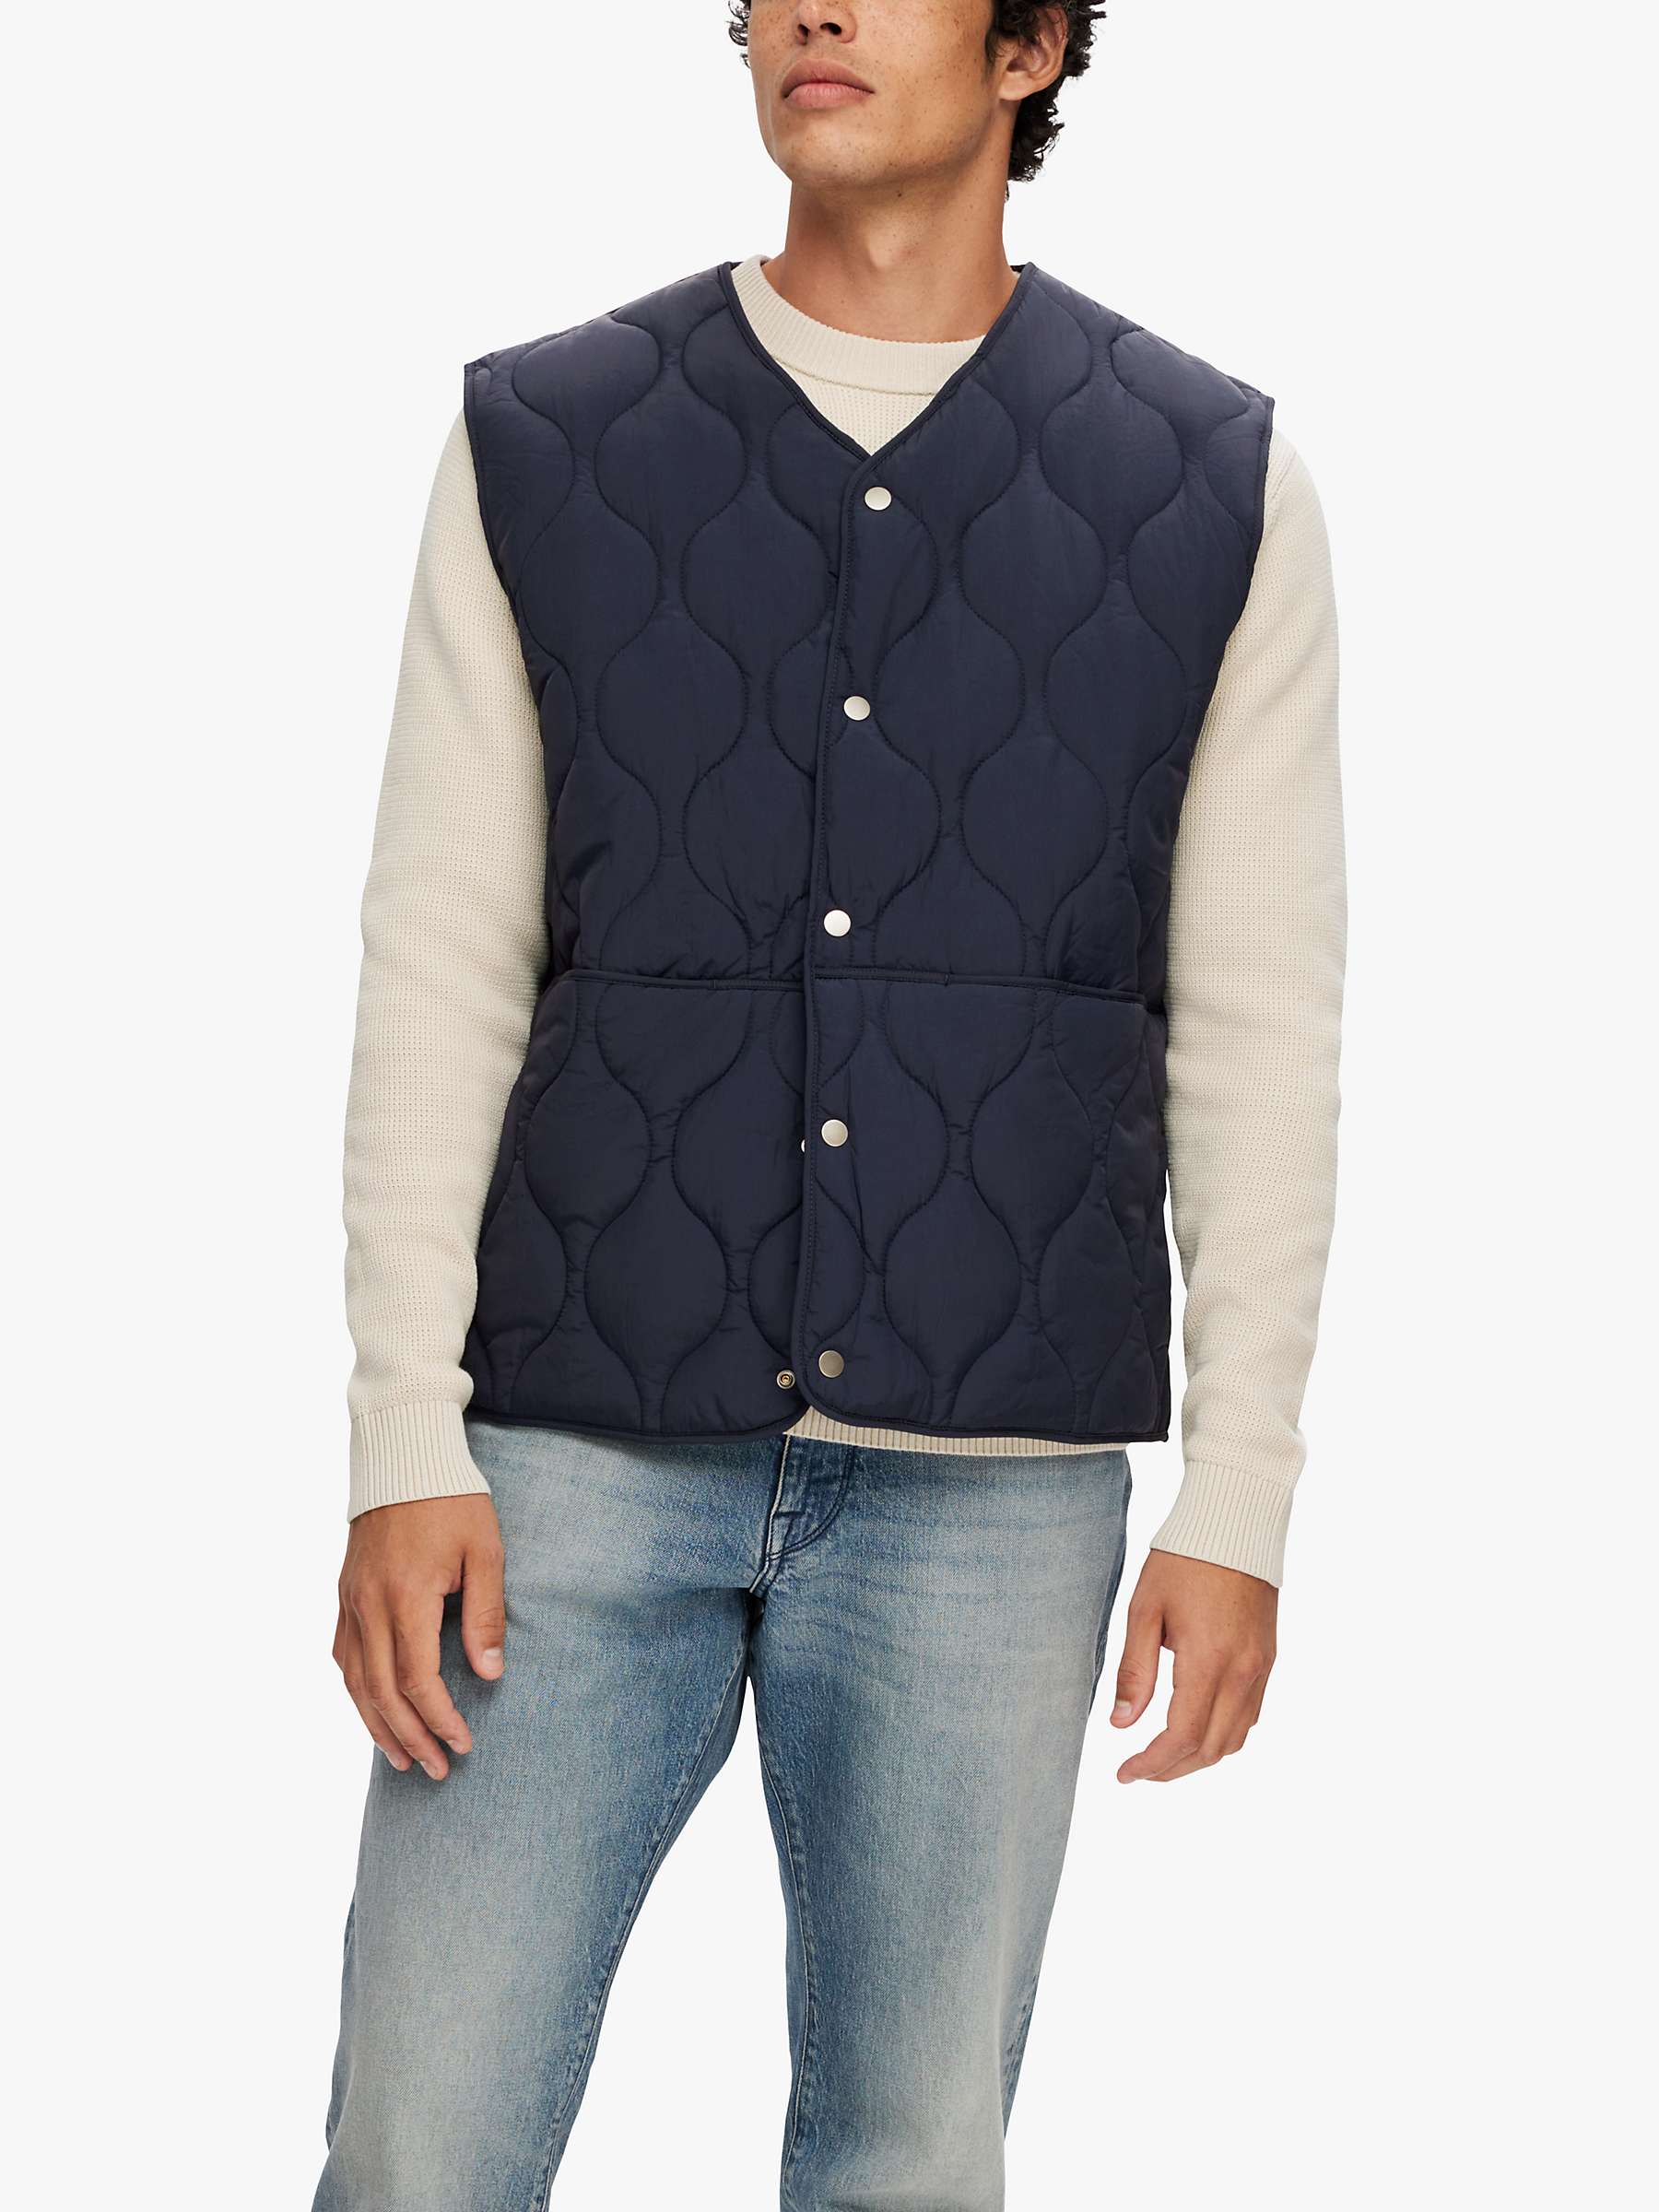 Buy SELECTED HOMME Autumn Essential Gilet Online at johnlewis.com